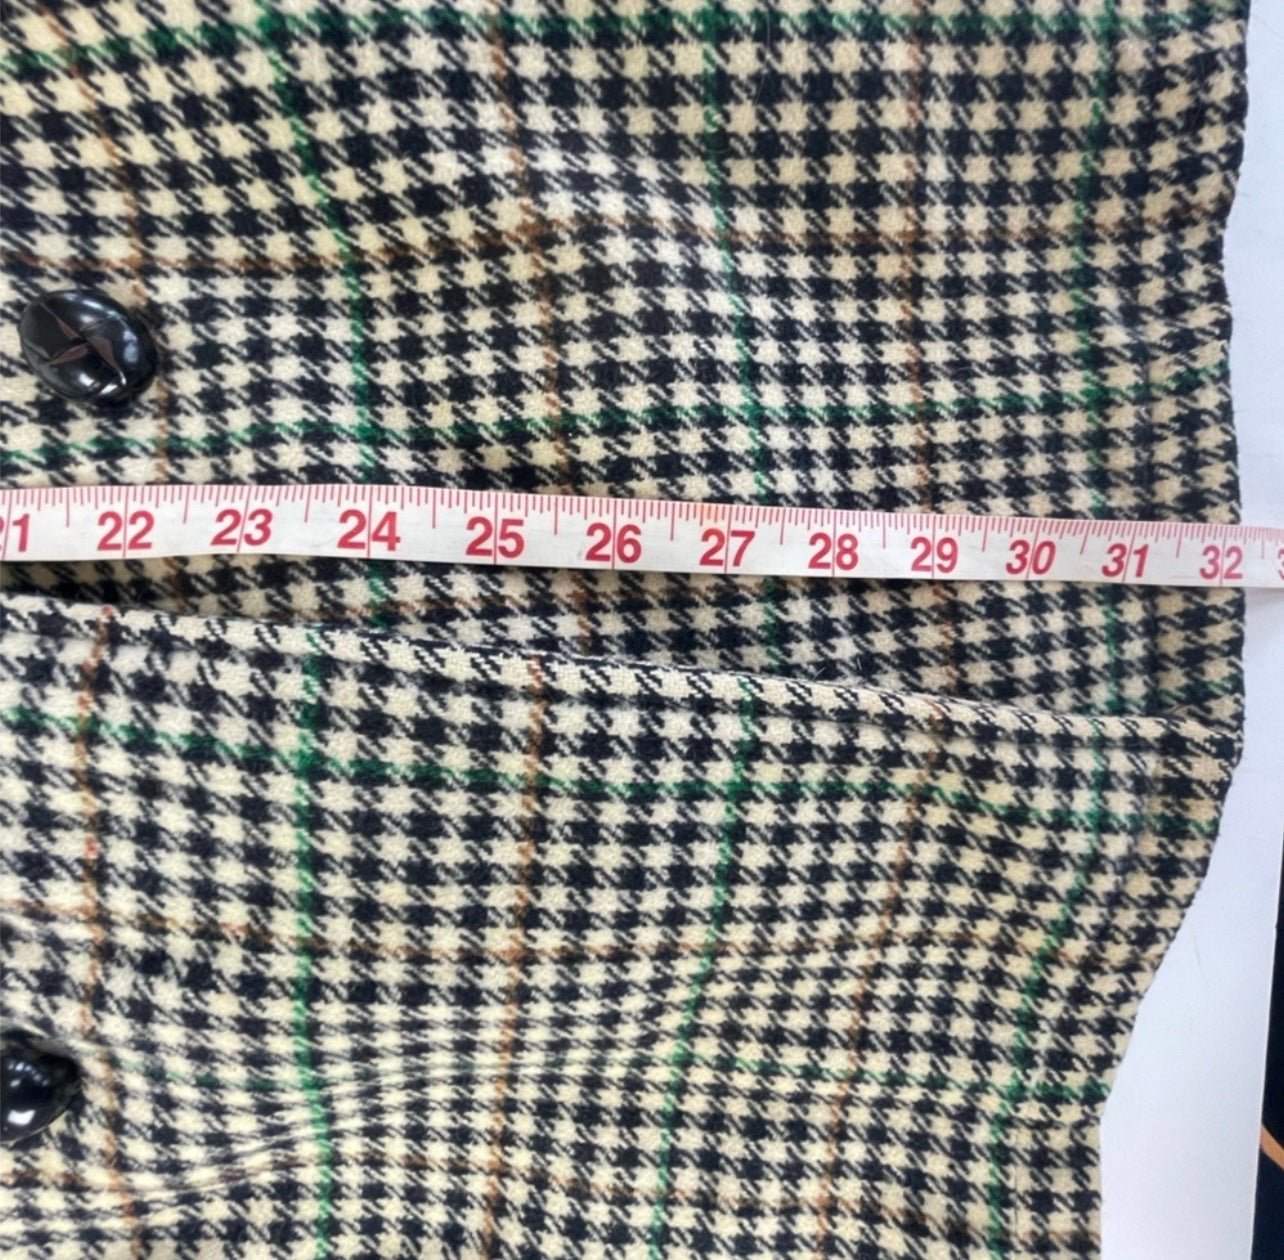 Affordable Beautiful VINTAGE Plaid Overcoat RARE vintage antique rare limited edition O9bGxJ5C7 Outlet Store